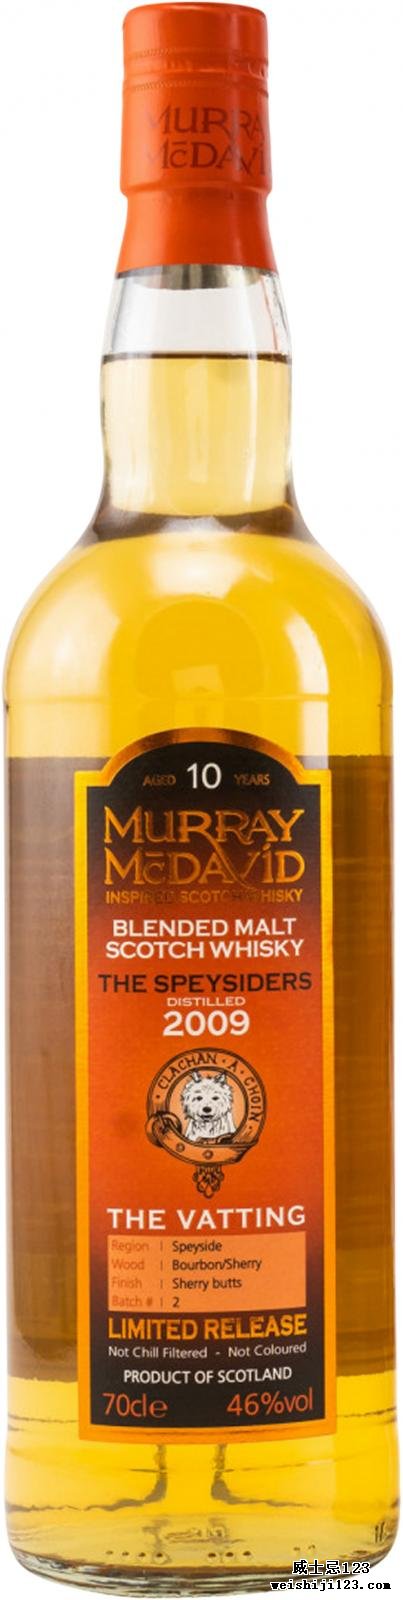 The Speysiders 2009 MM